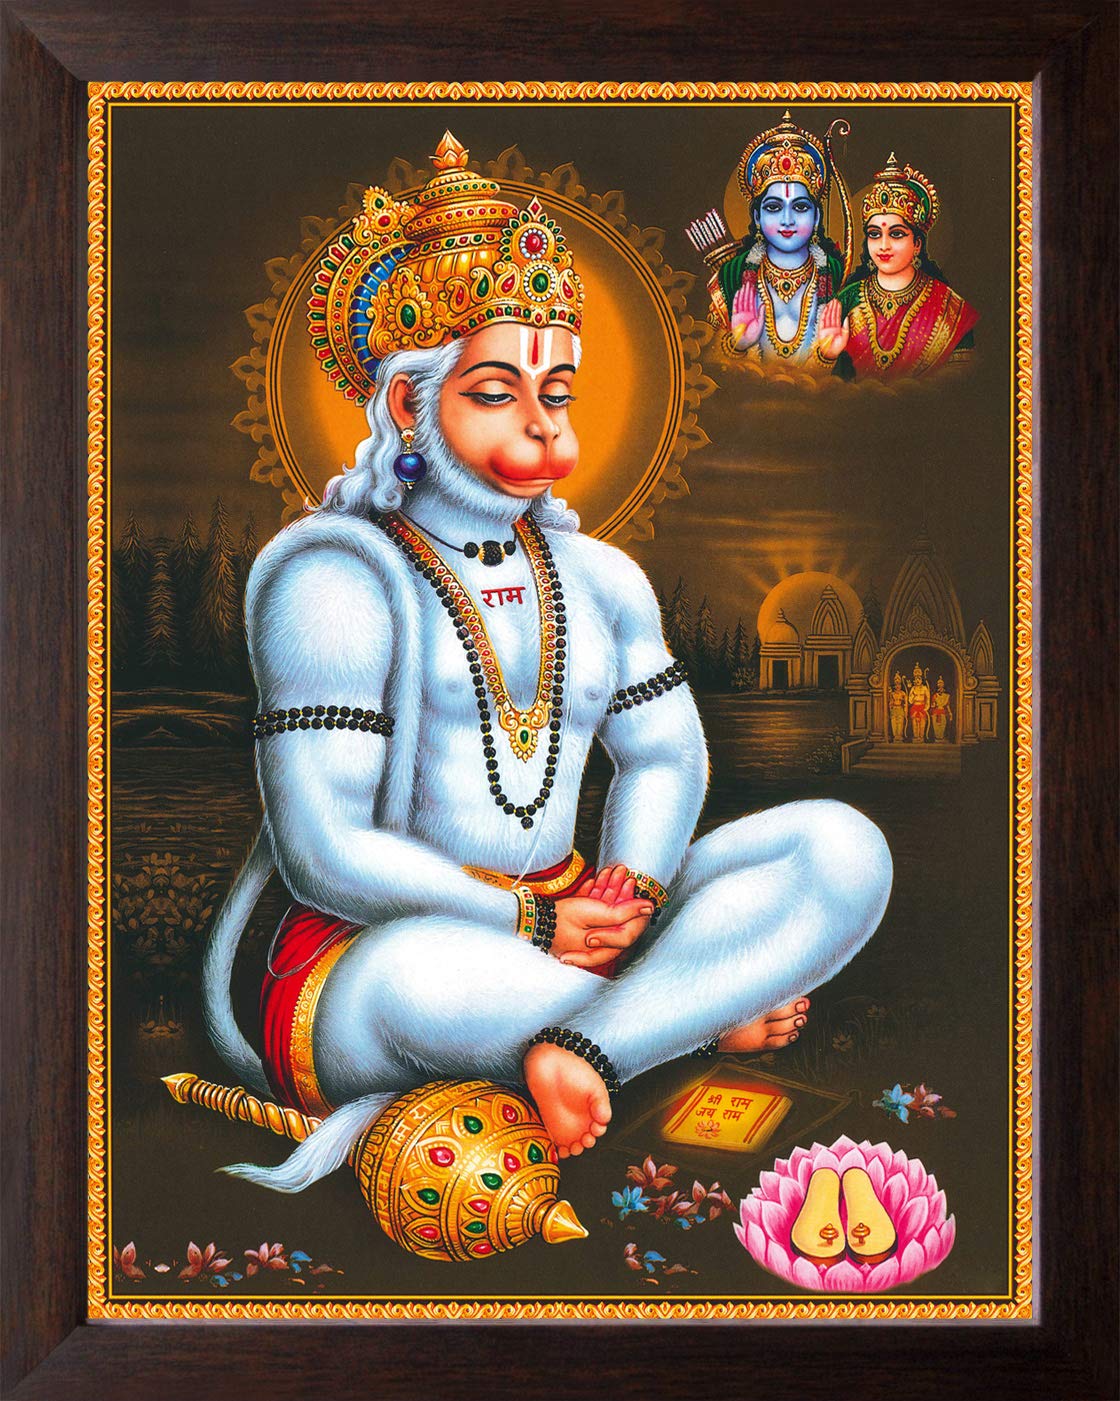 Best Lord Hanuman Image to Bring Positive Energy in Your Home